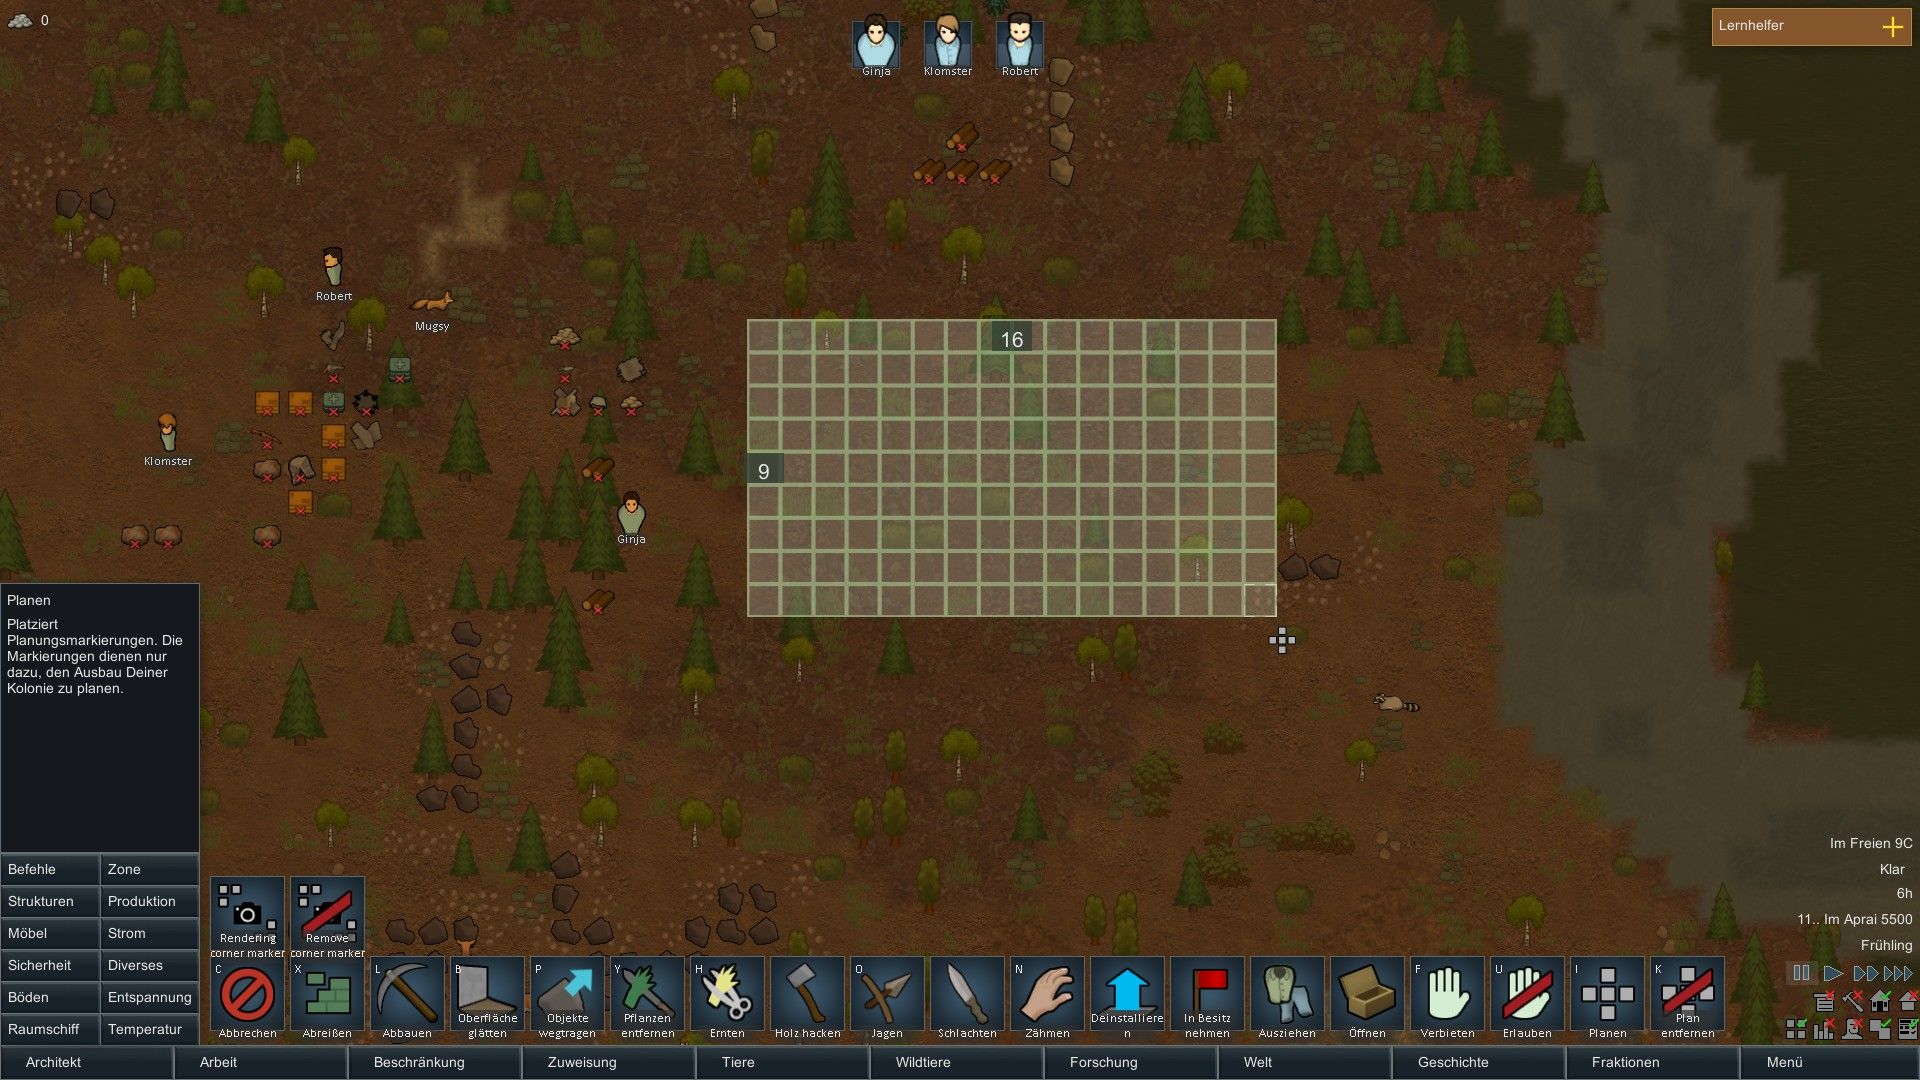 Creating a rectangular plan in RimWorld with the planning tool